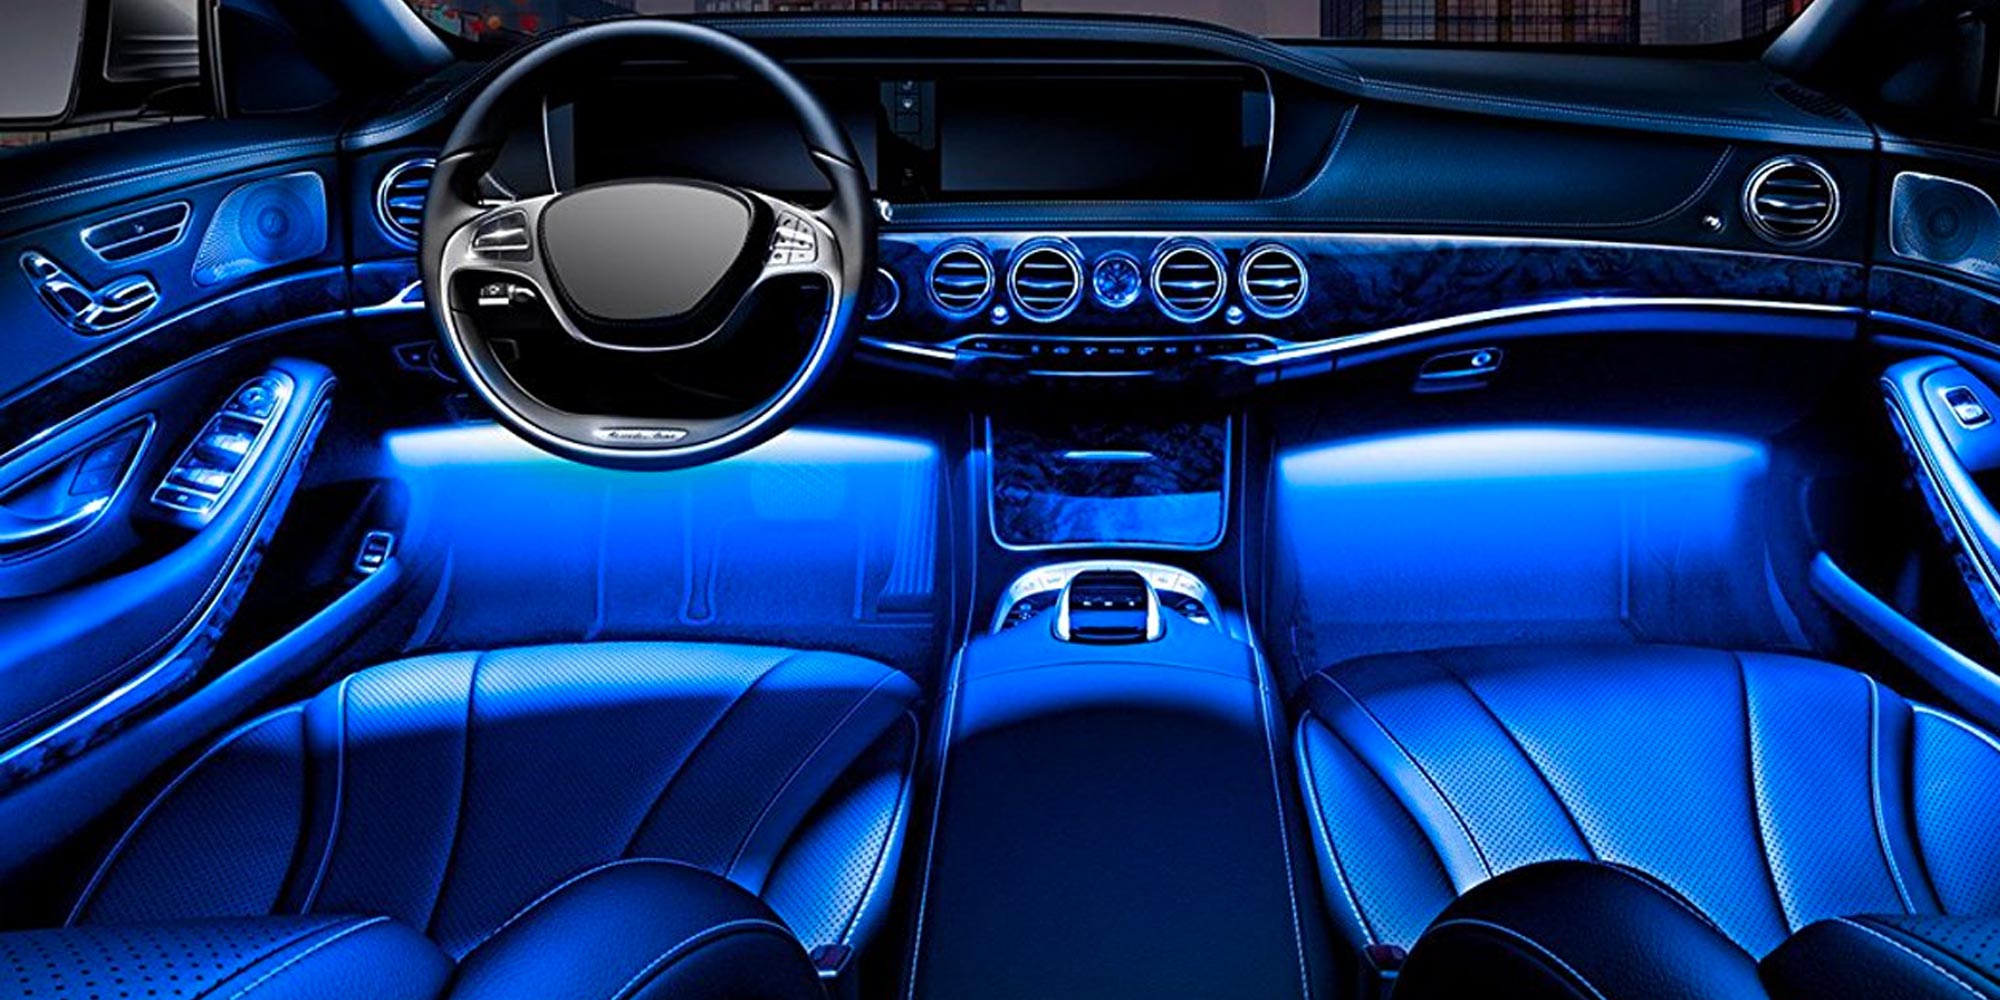 Add RGB lighting to your car's interior for under $10 Prime shipped at